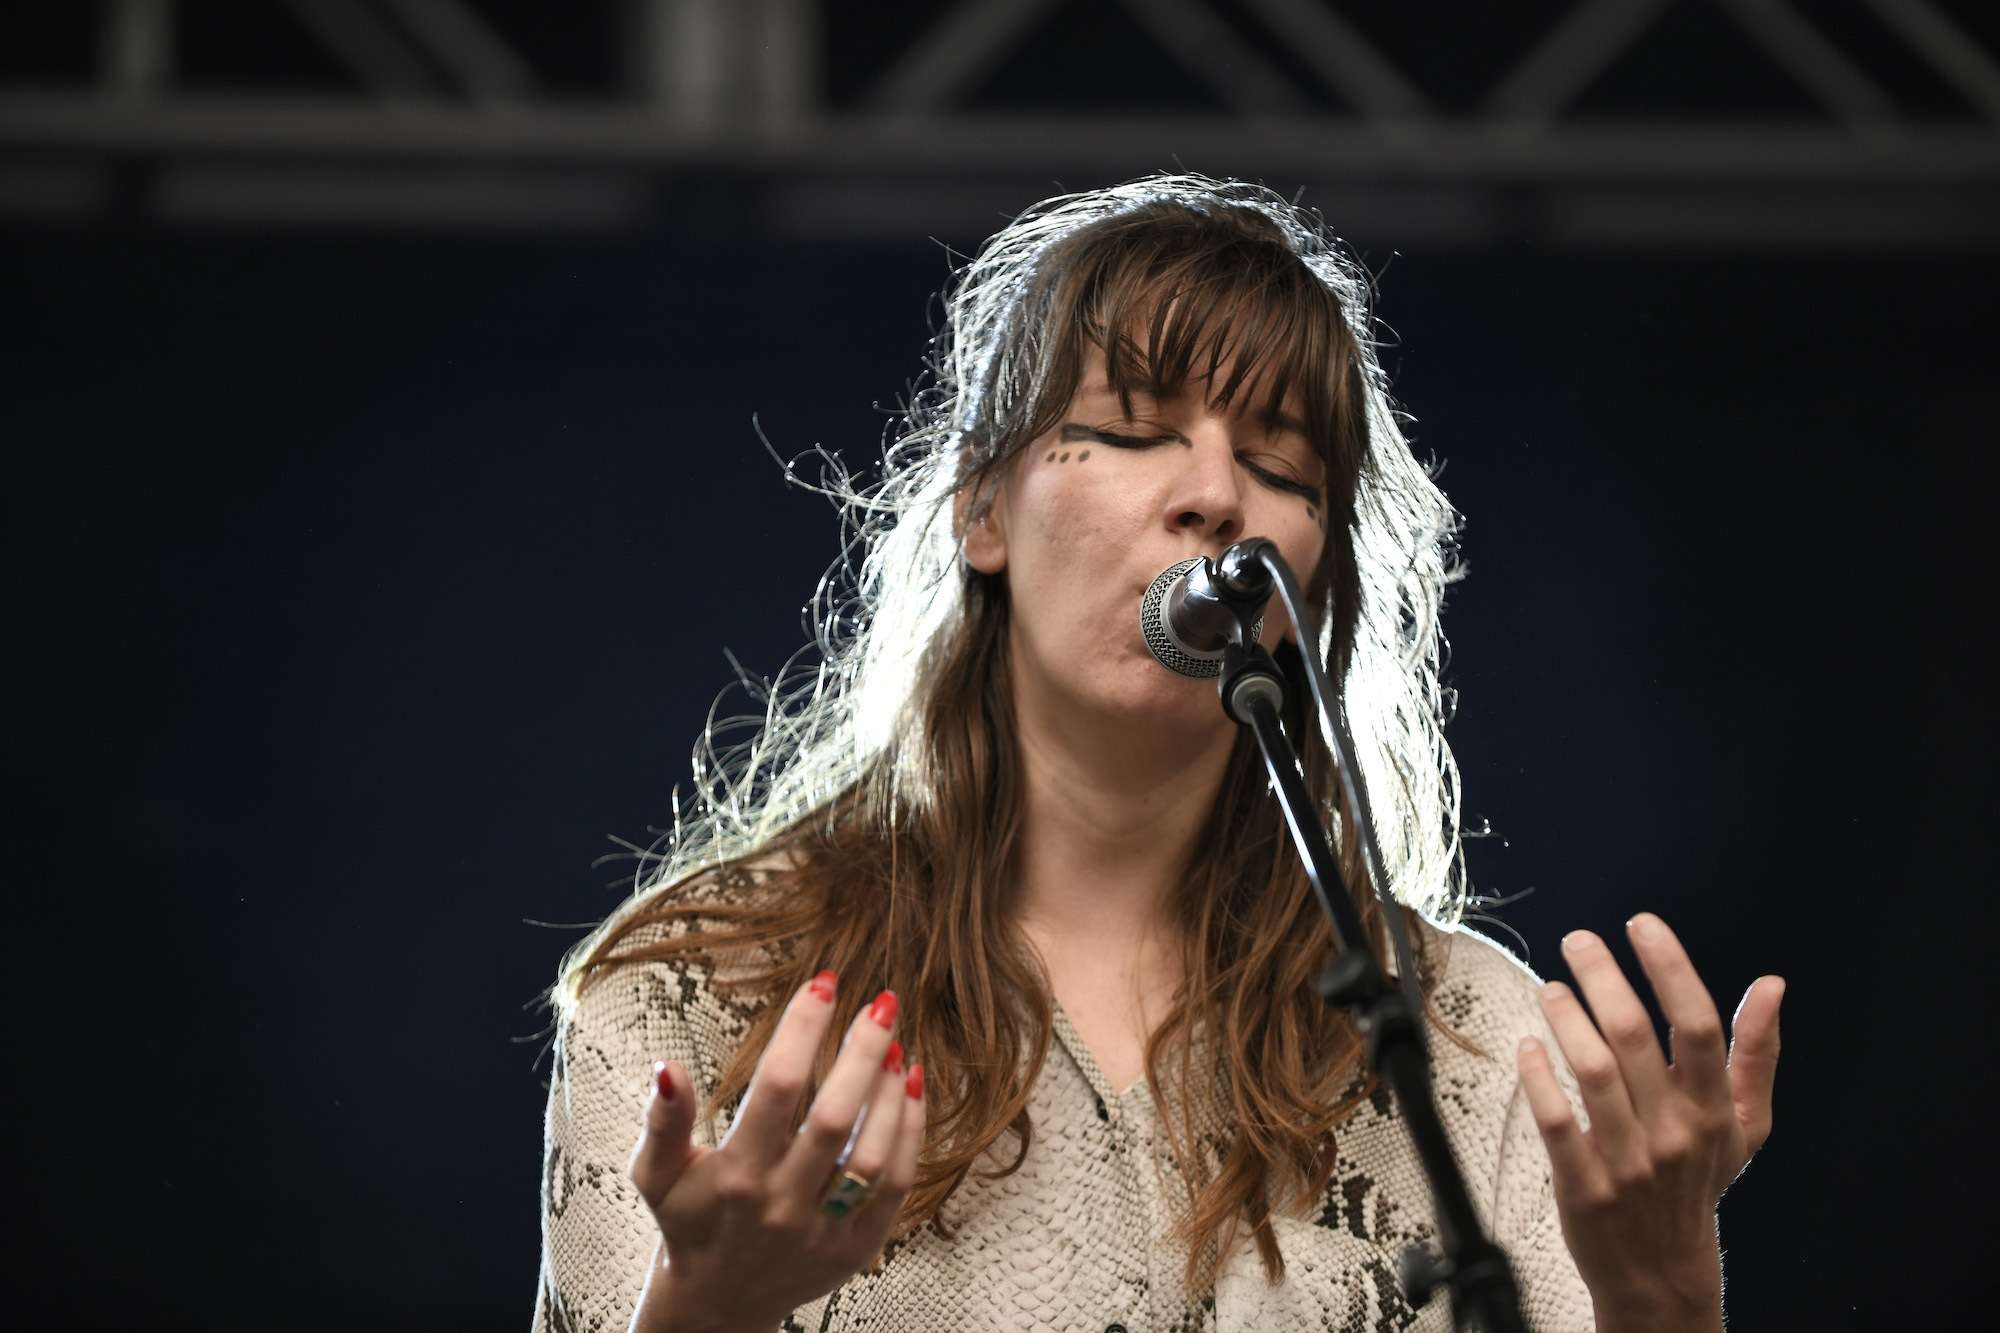 Circuit des Yeux Live at Pitchfork [GALLERY] 6